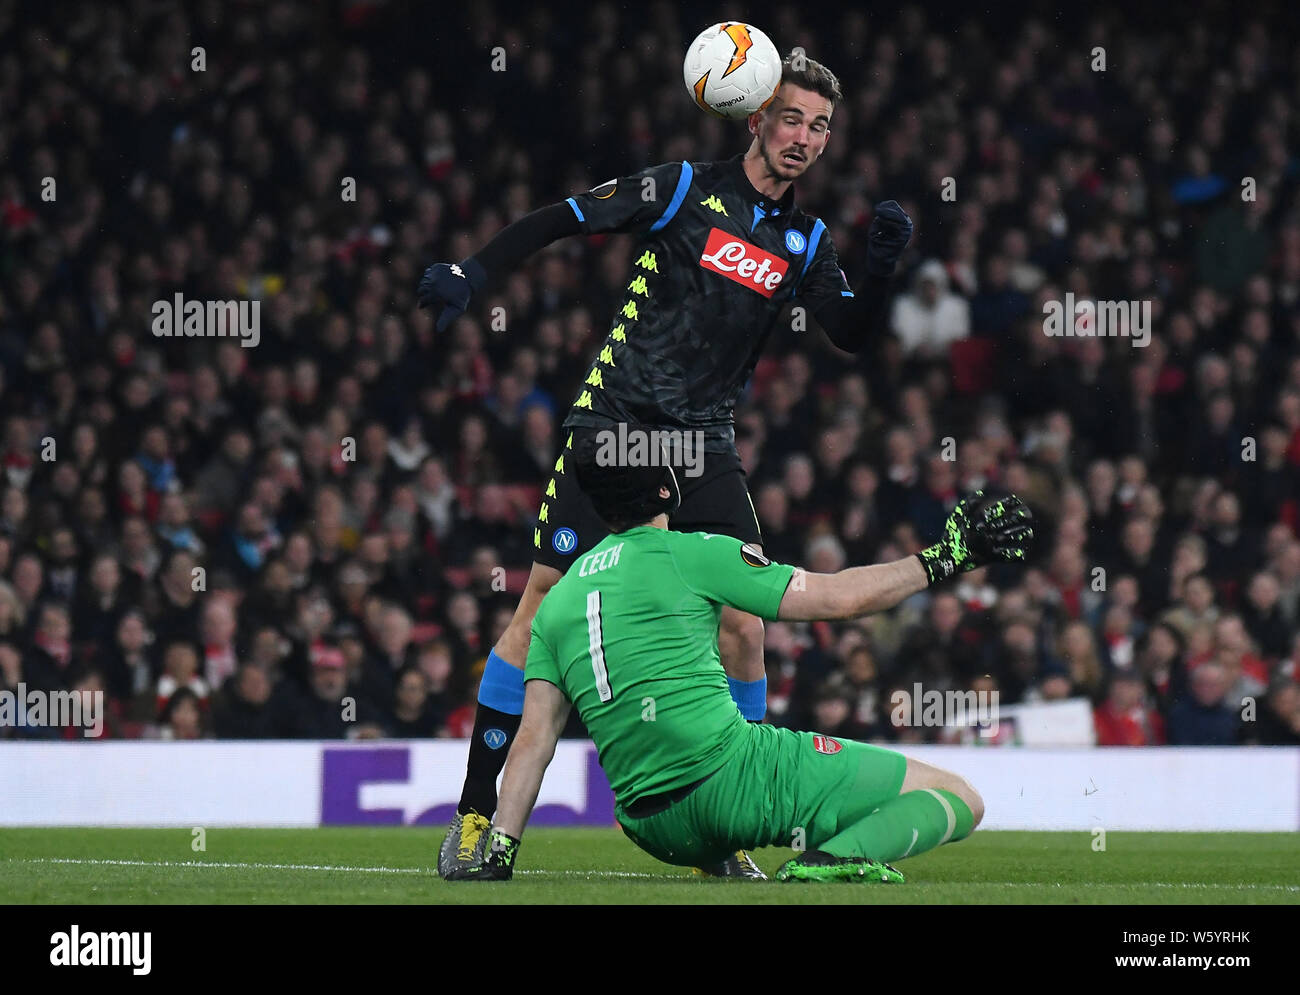 LONDON, ENGLAND - APRIL 11, 2019: Fabian Ruiz Pena of Napoli and Petr Cech of Arsenal pictured during the first leg of the 2018/19 UEFA Europa League Quarter-finals game between Arsenal FC (England) and SSC Napoli (Italy) at Emirates Stadium. Stock Photo